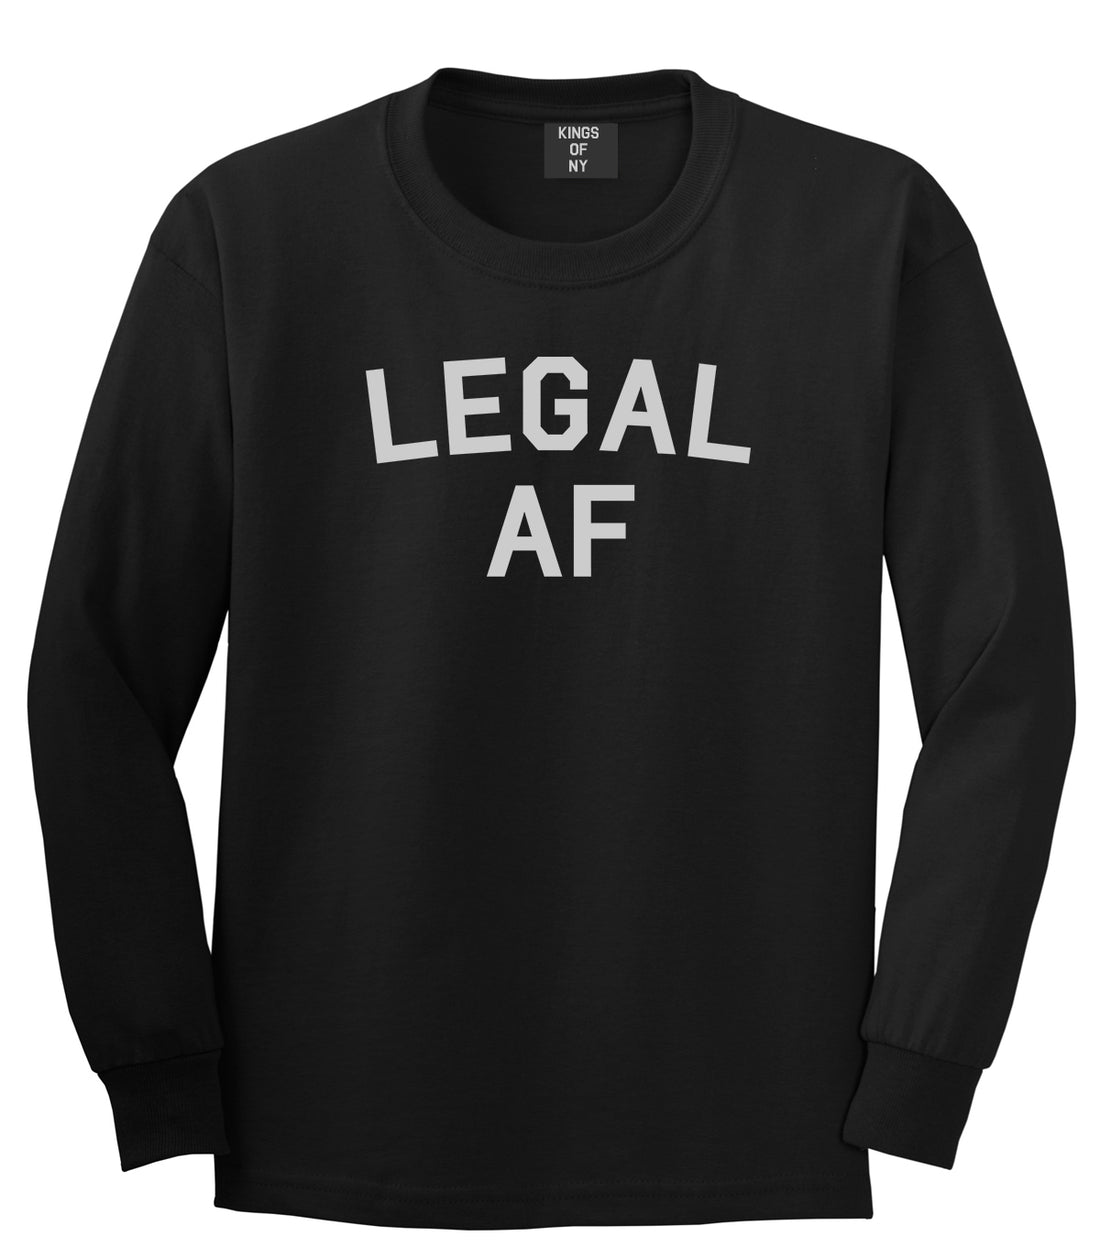 Legal AF 21st Birthday Mens Long Sleeve T-Shirt Black by Kings Of NY